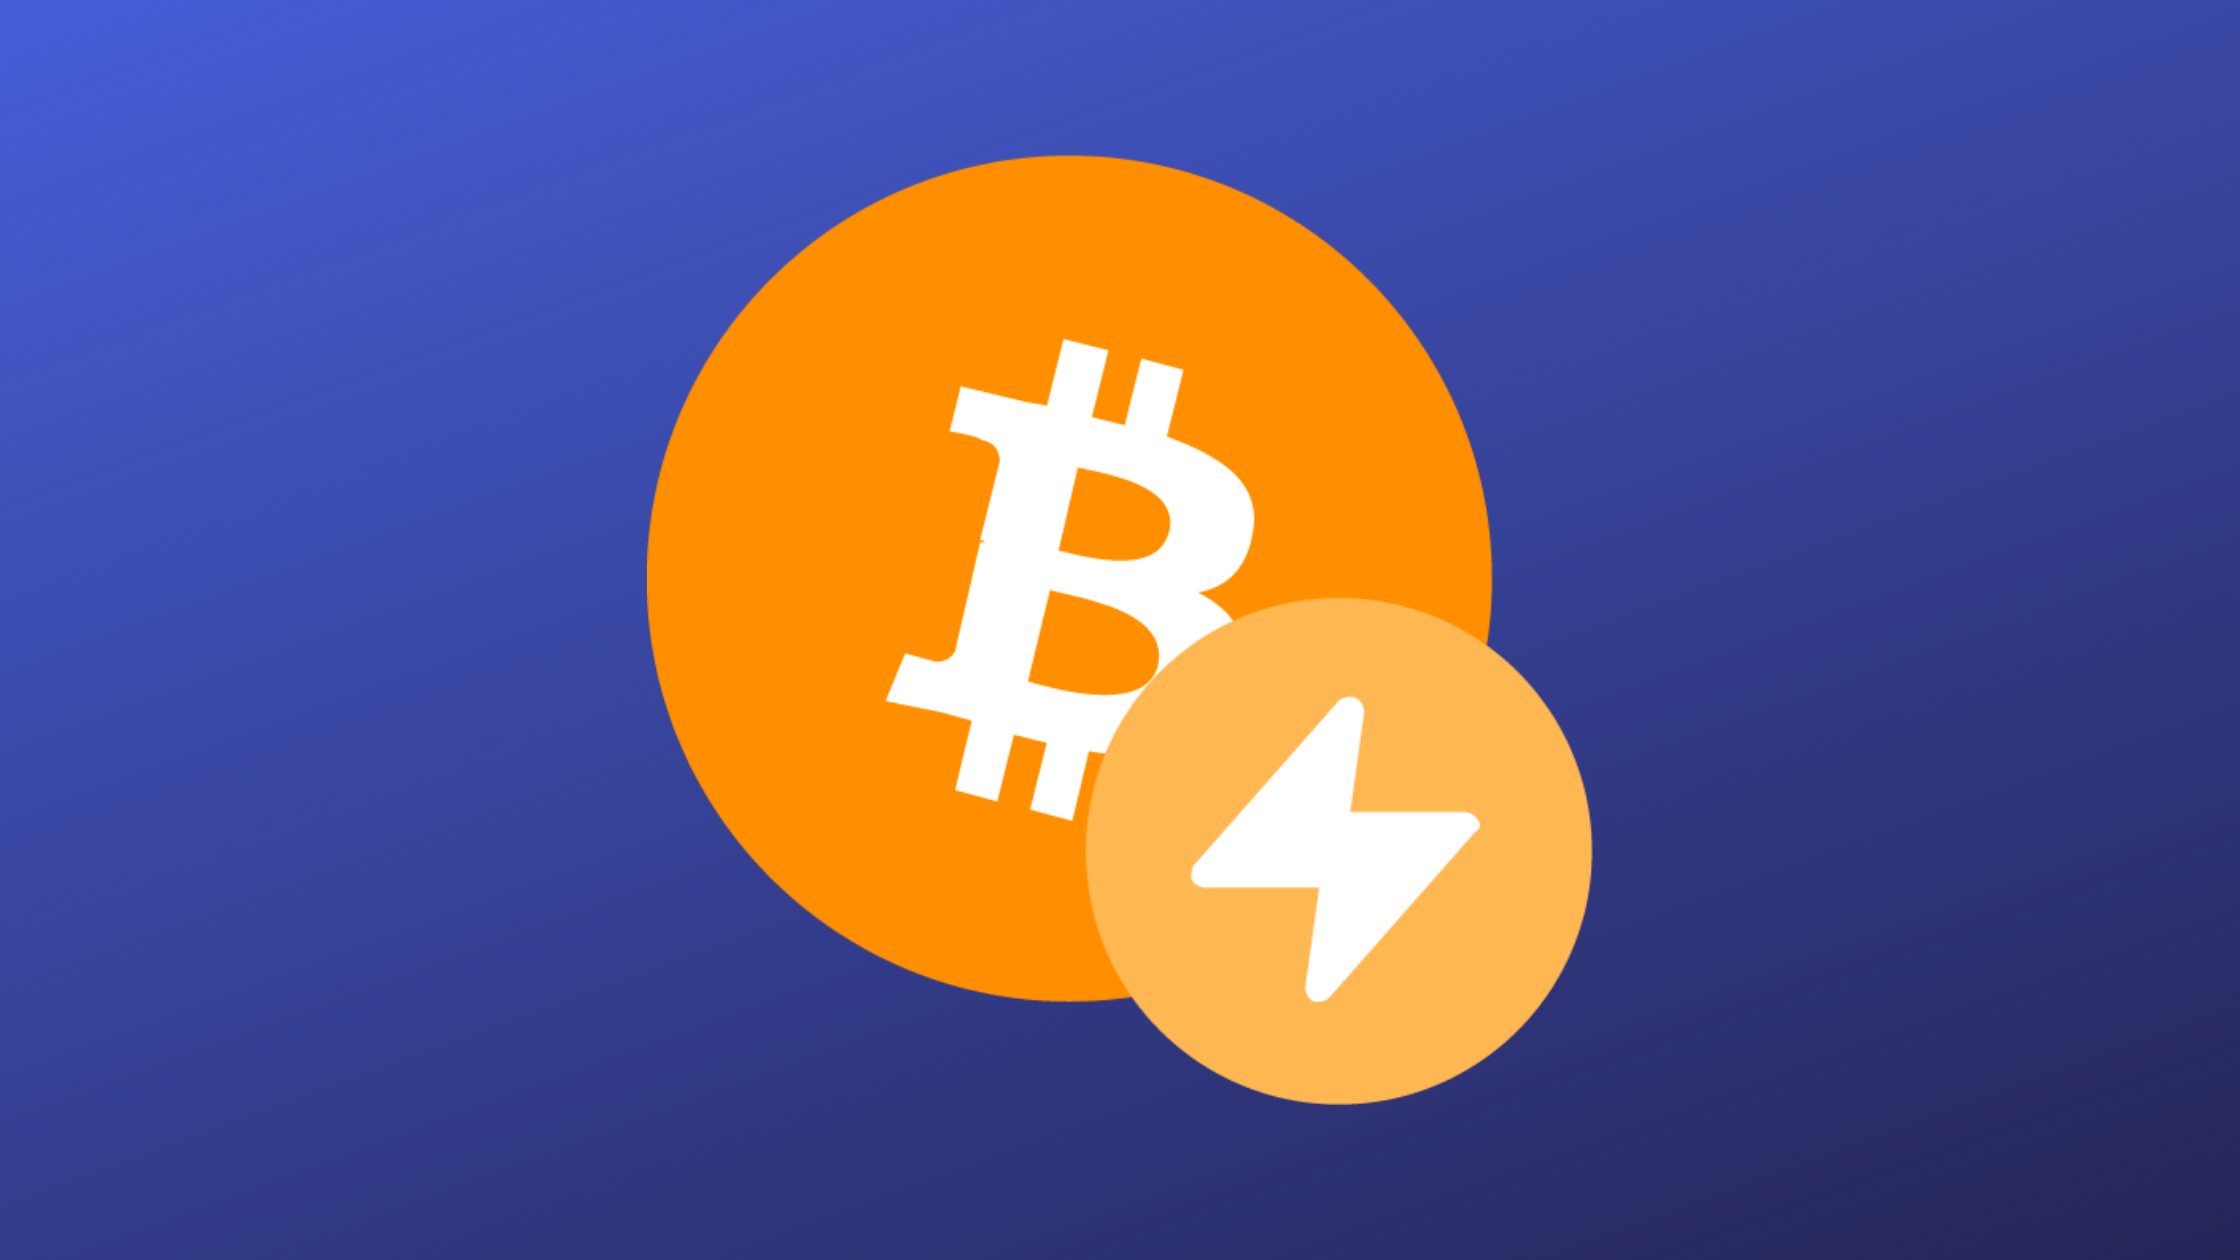 Michael Saylor has integrated his email addresses with Bitcoin lightning